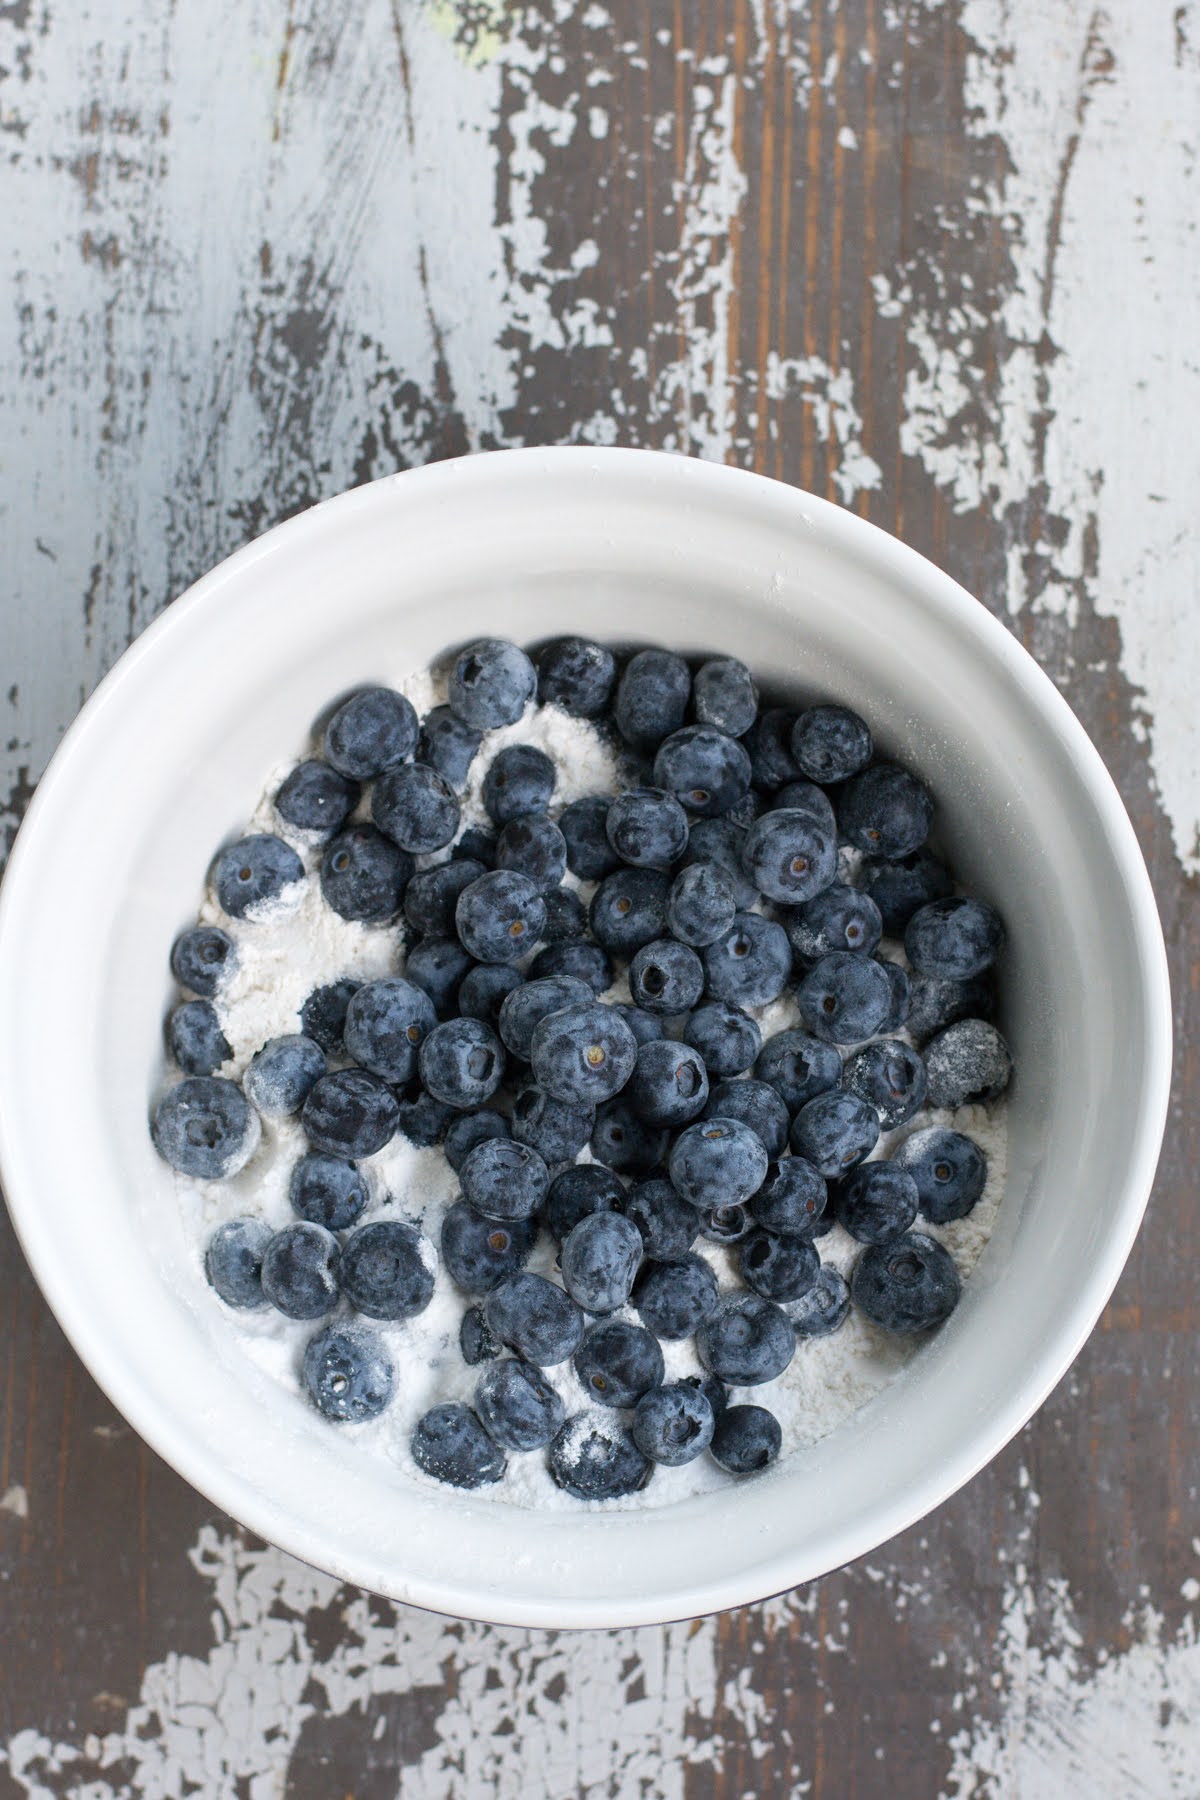 Blueberries in a mixing bowl.